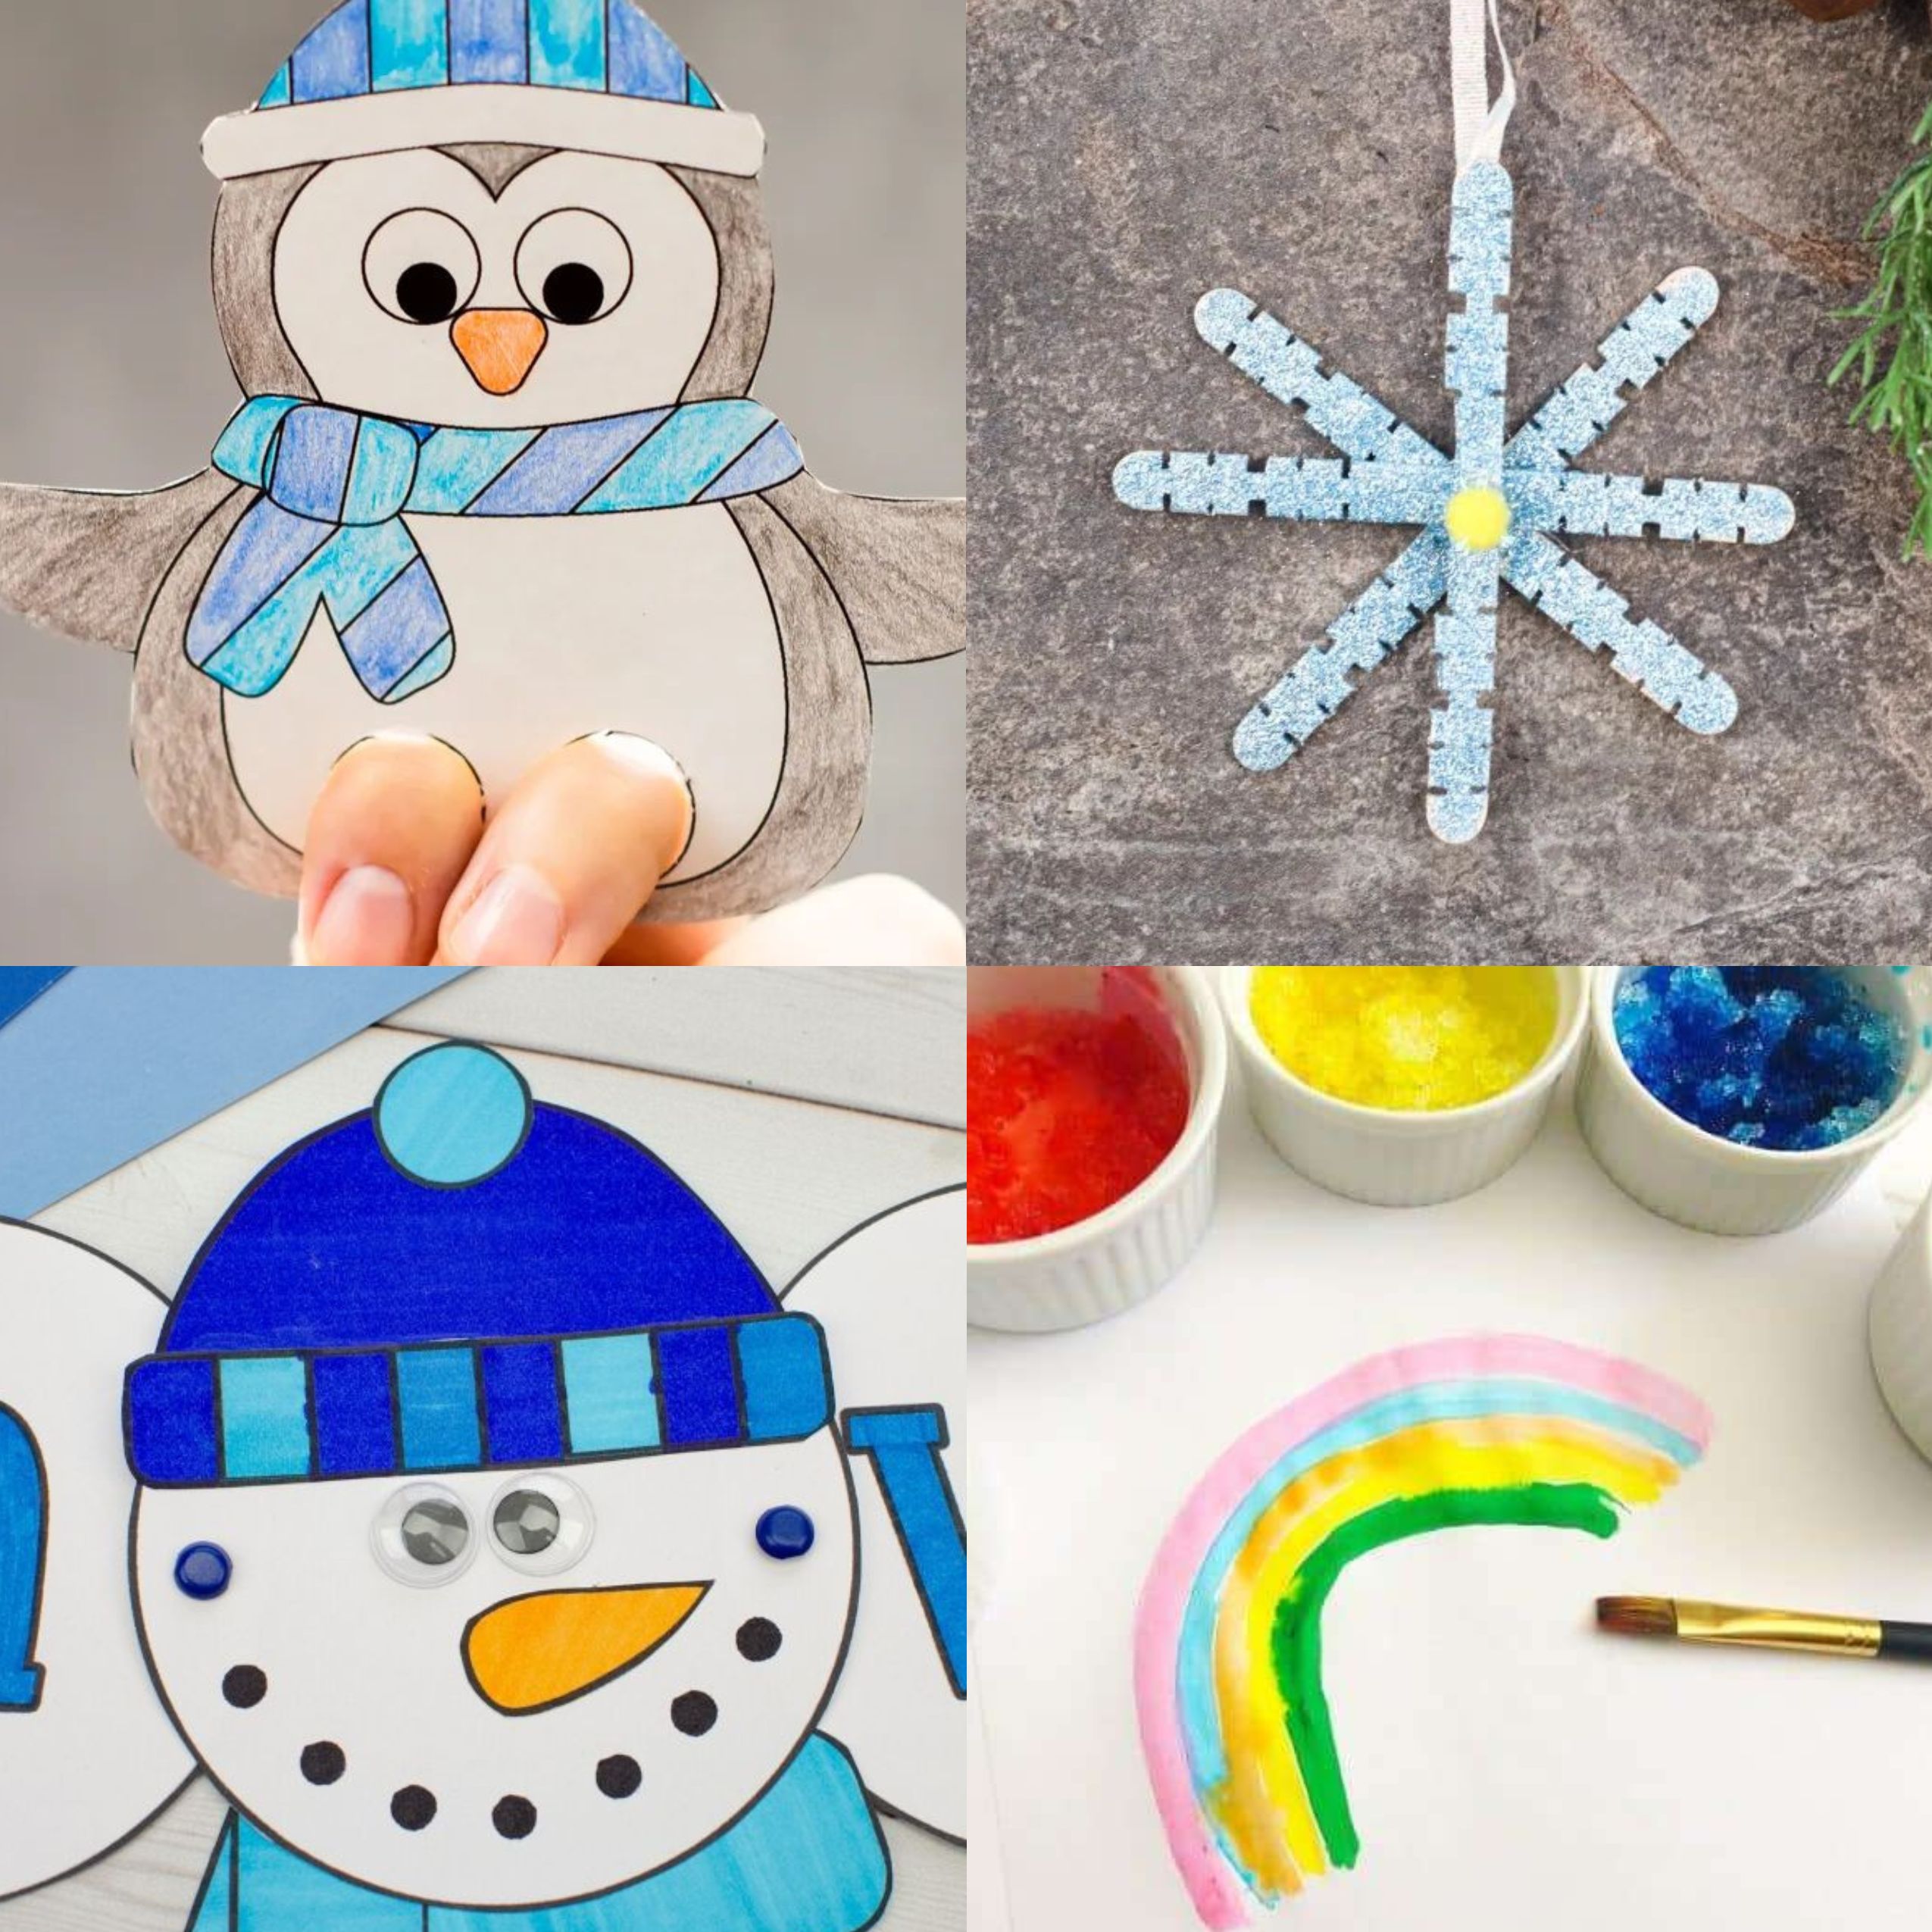 31 Winter Crafts for Toddlers - Craftsy Hacks